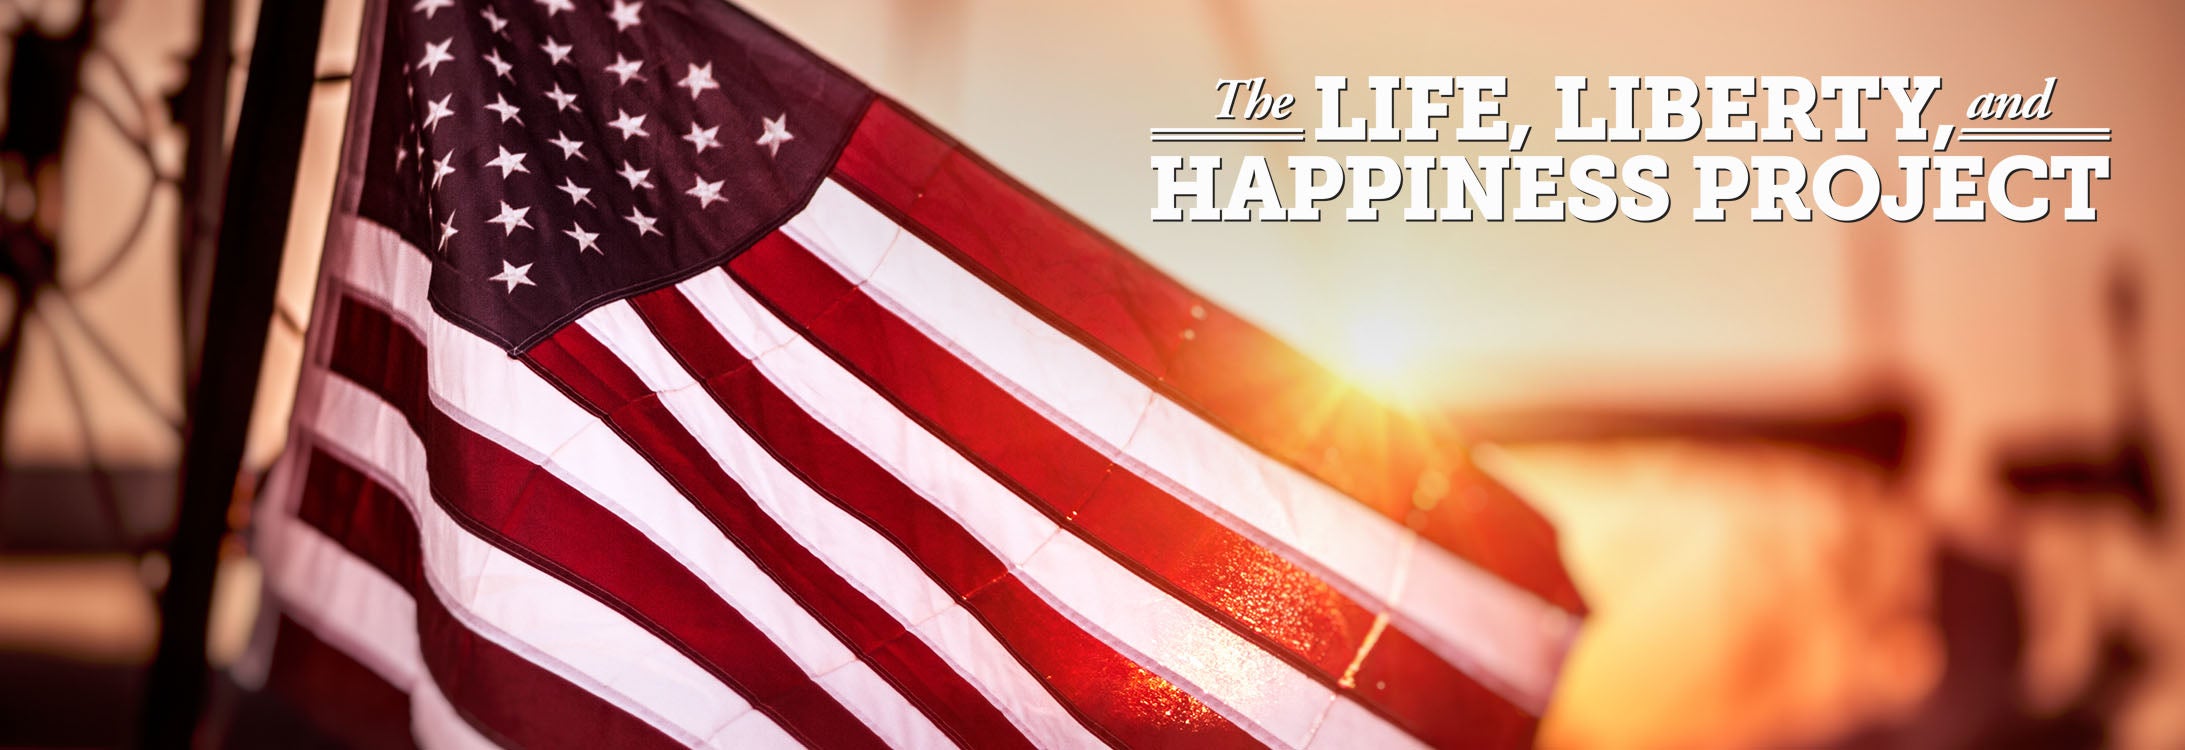 The Life, Liberty, and Happiness Project